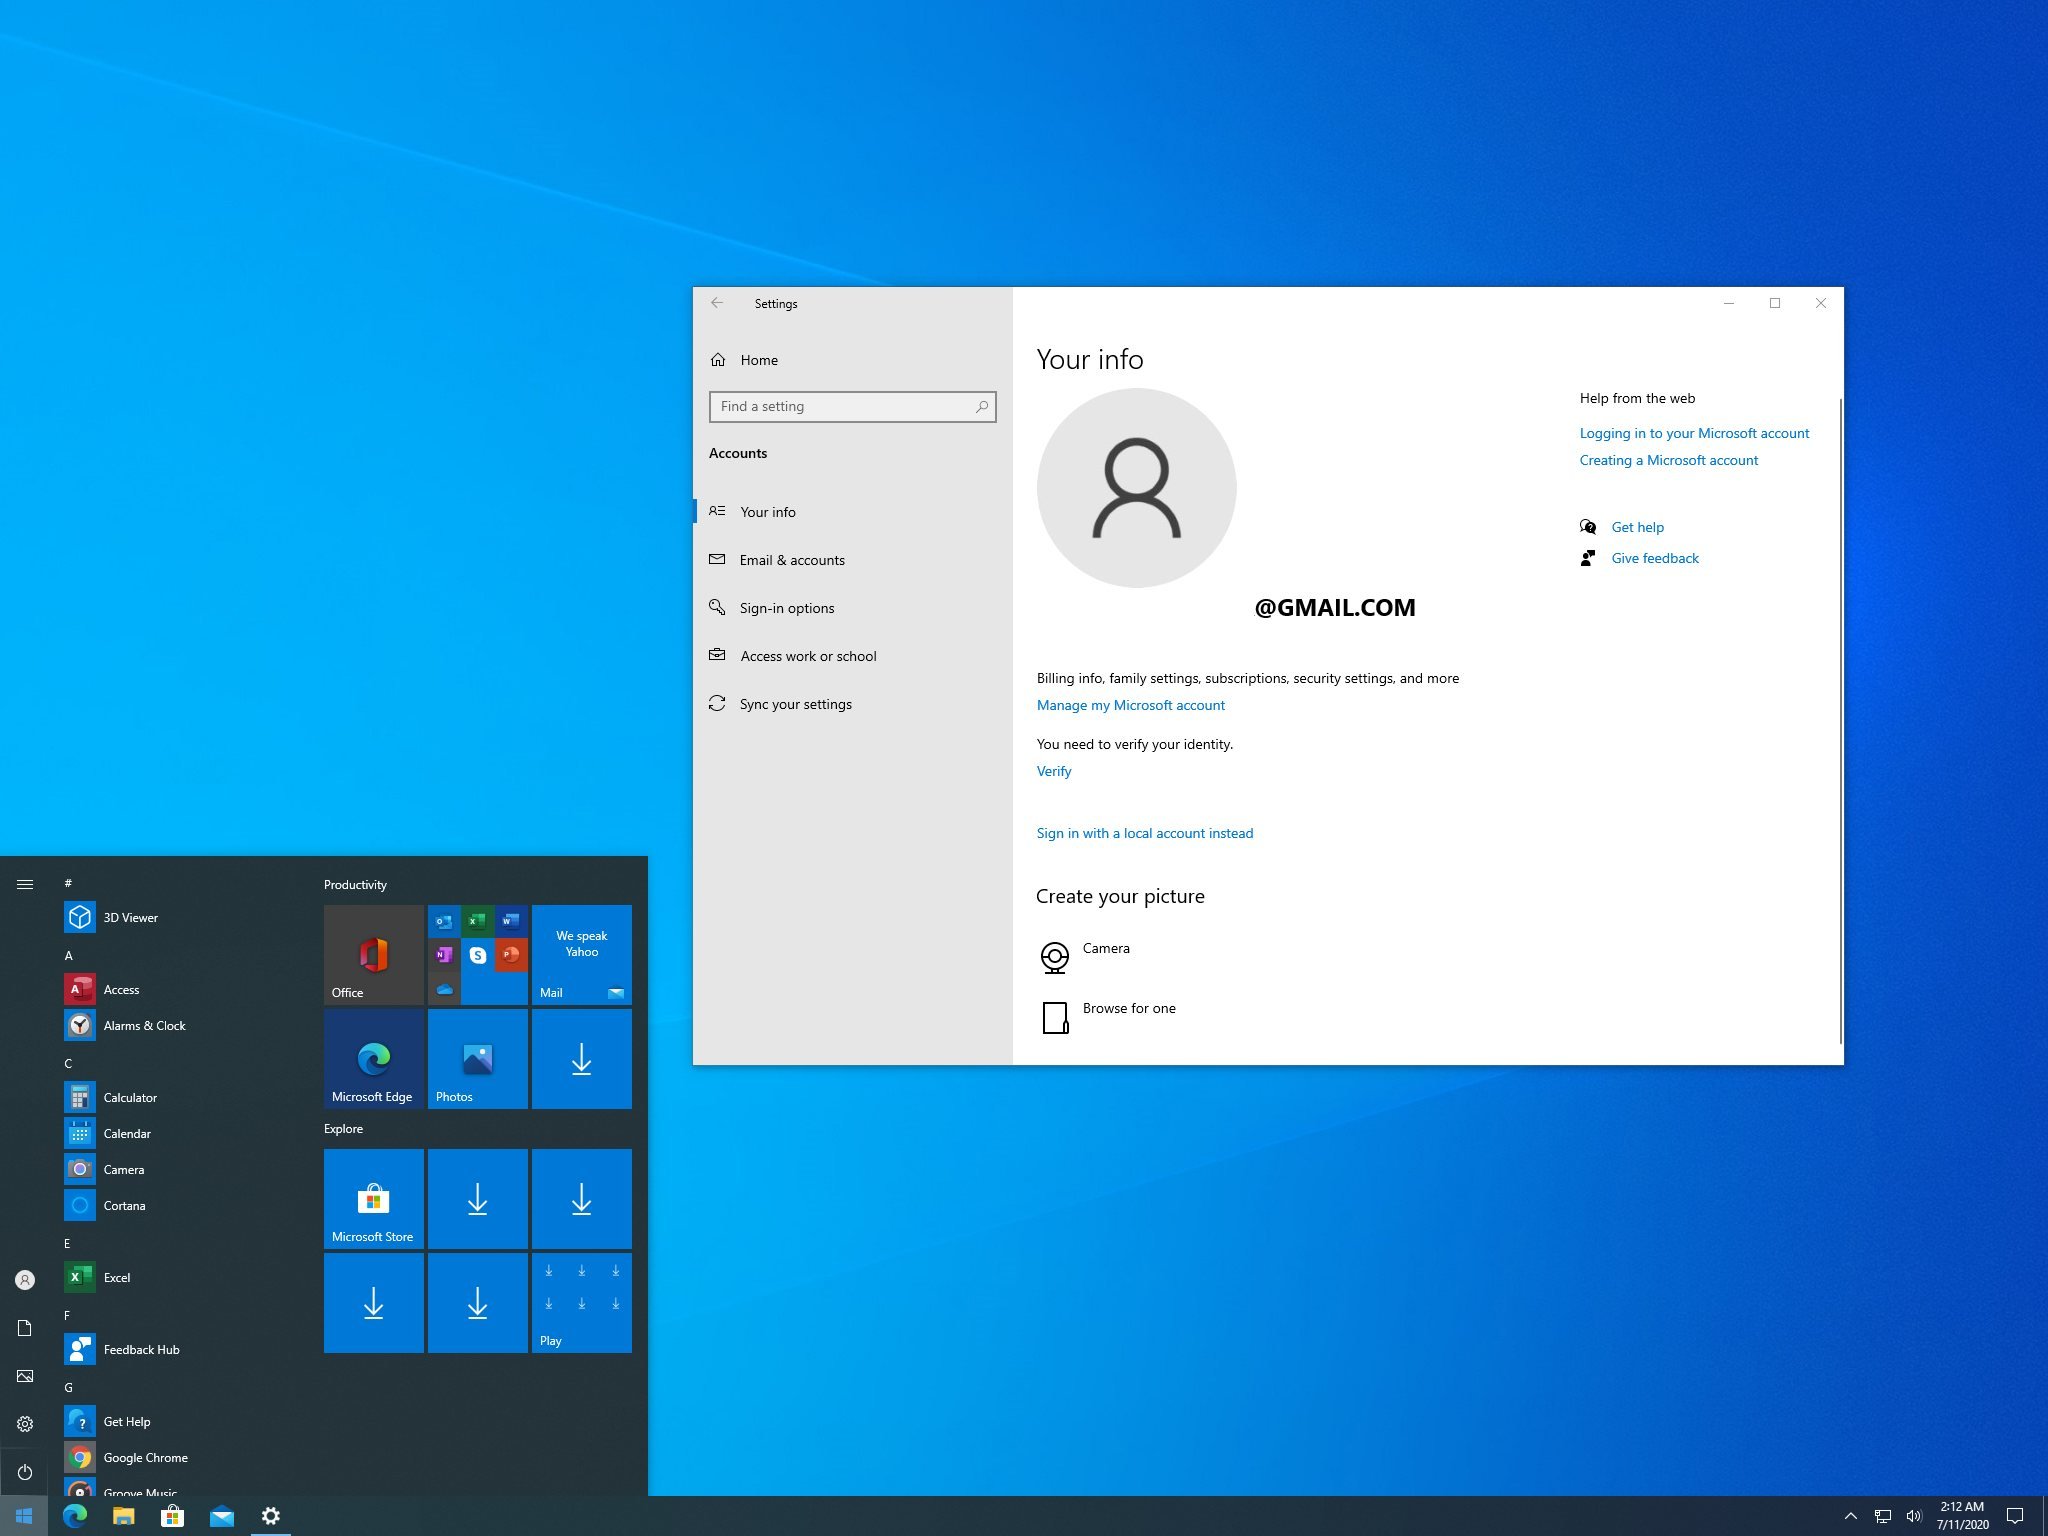 How Do I Know If I Use A Microsoft Account in Windows 10 / 8